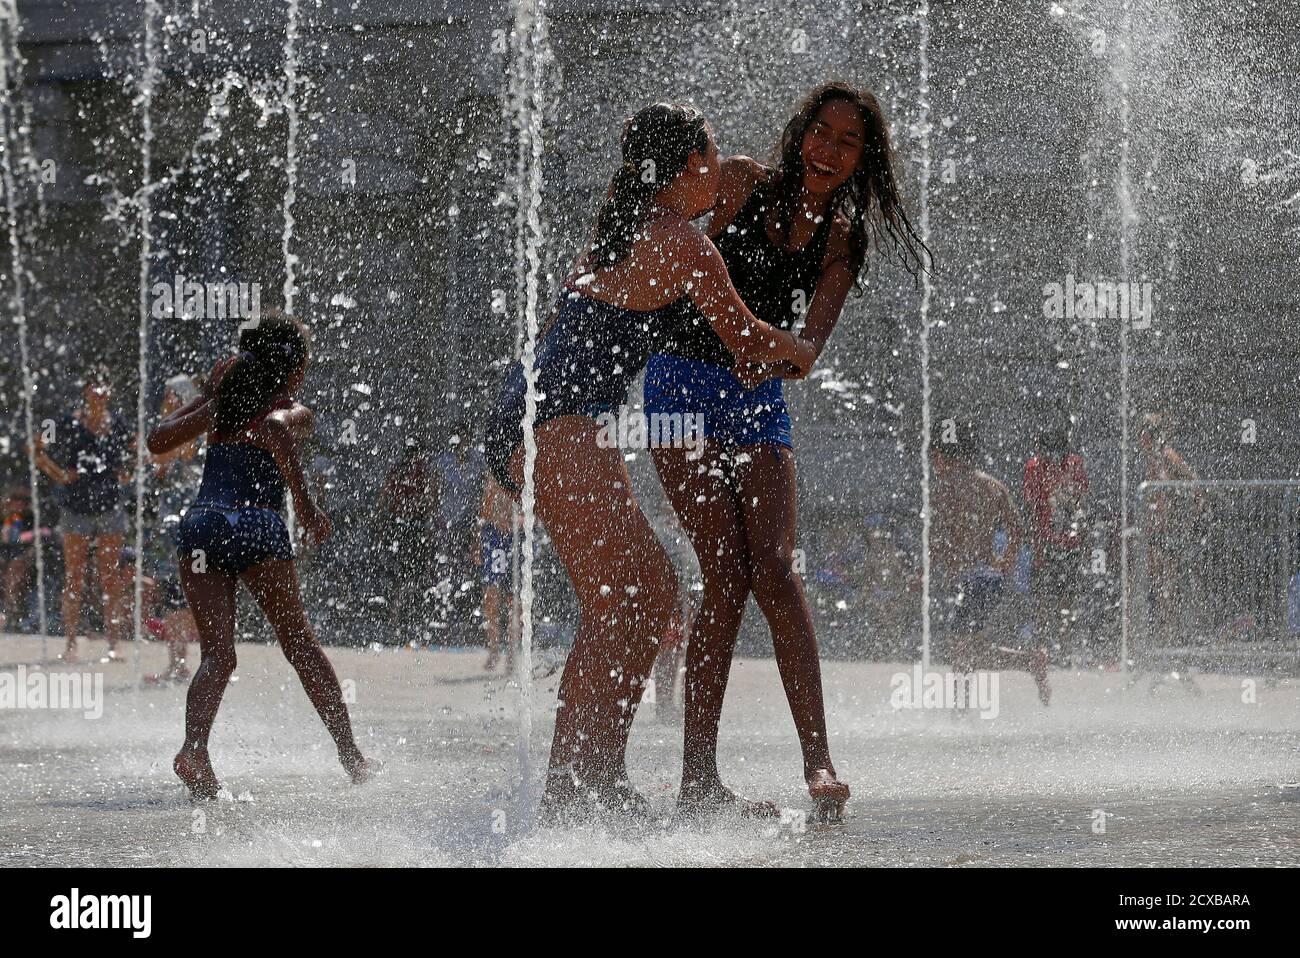 Young girls enjoy the hot weather playing in fountains in central London ahead of the London 2012 Olympic Games July 25, 2012.     REUTERS/Eddie Keogh (BRITAIN - Tags: ENVIRONMENT SPORT OLYMPICS CITYSPACE) Stock Photo